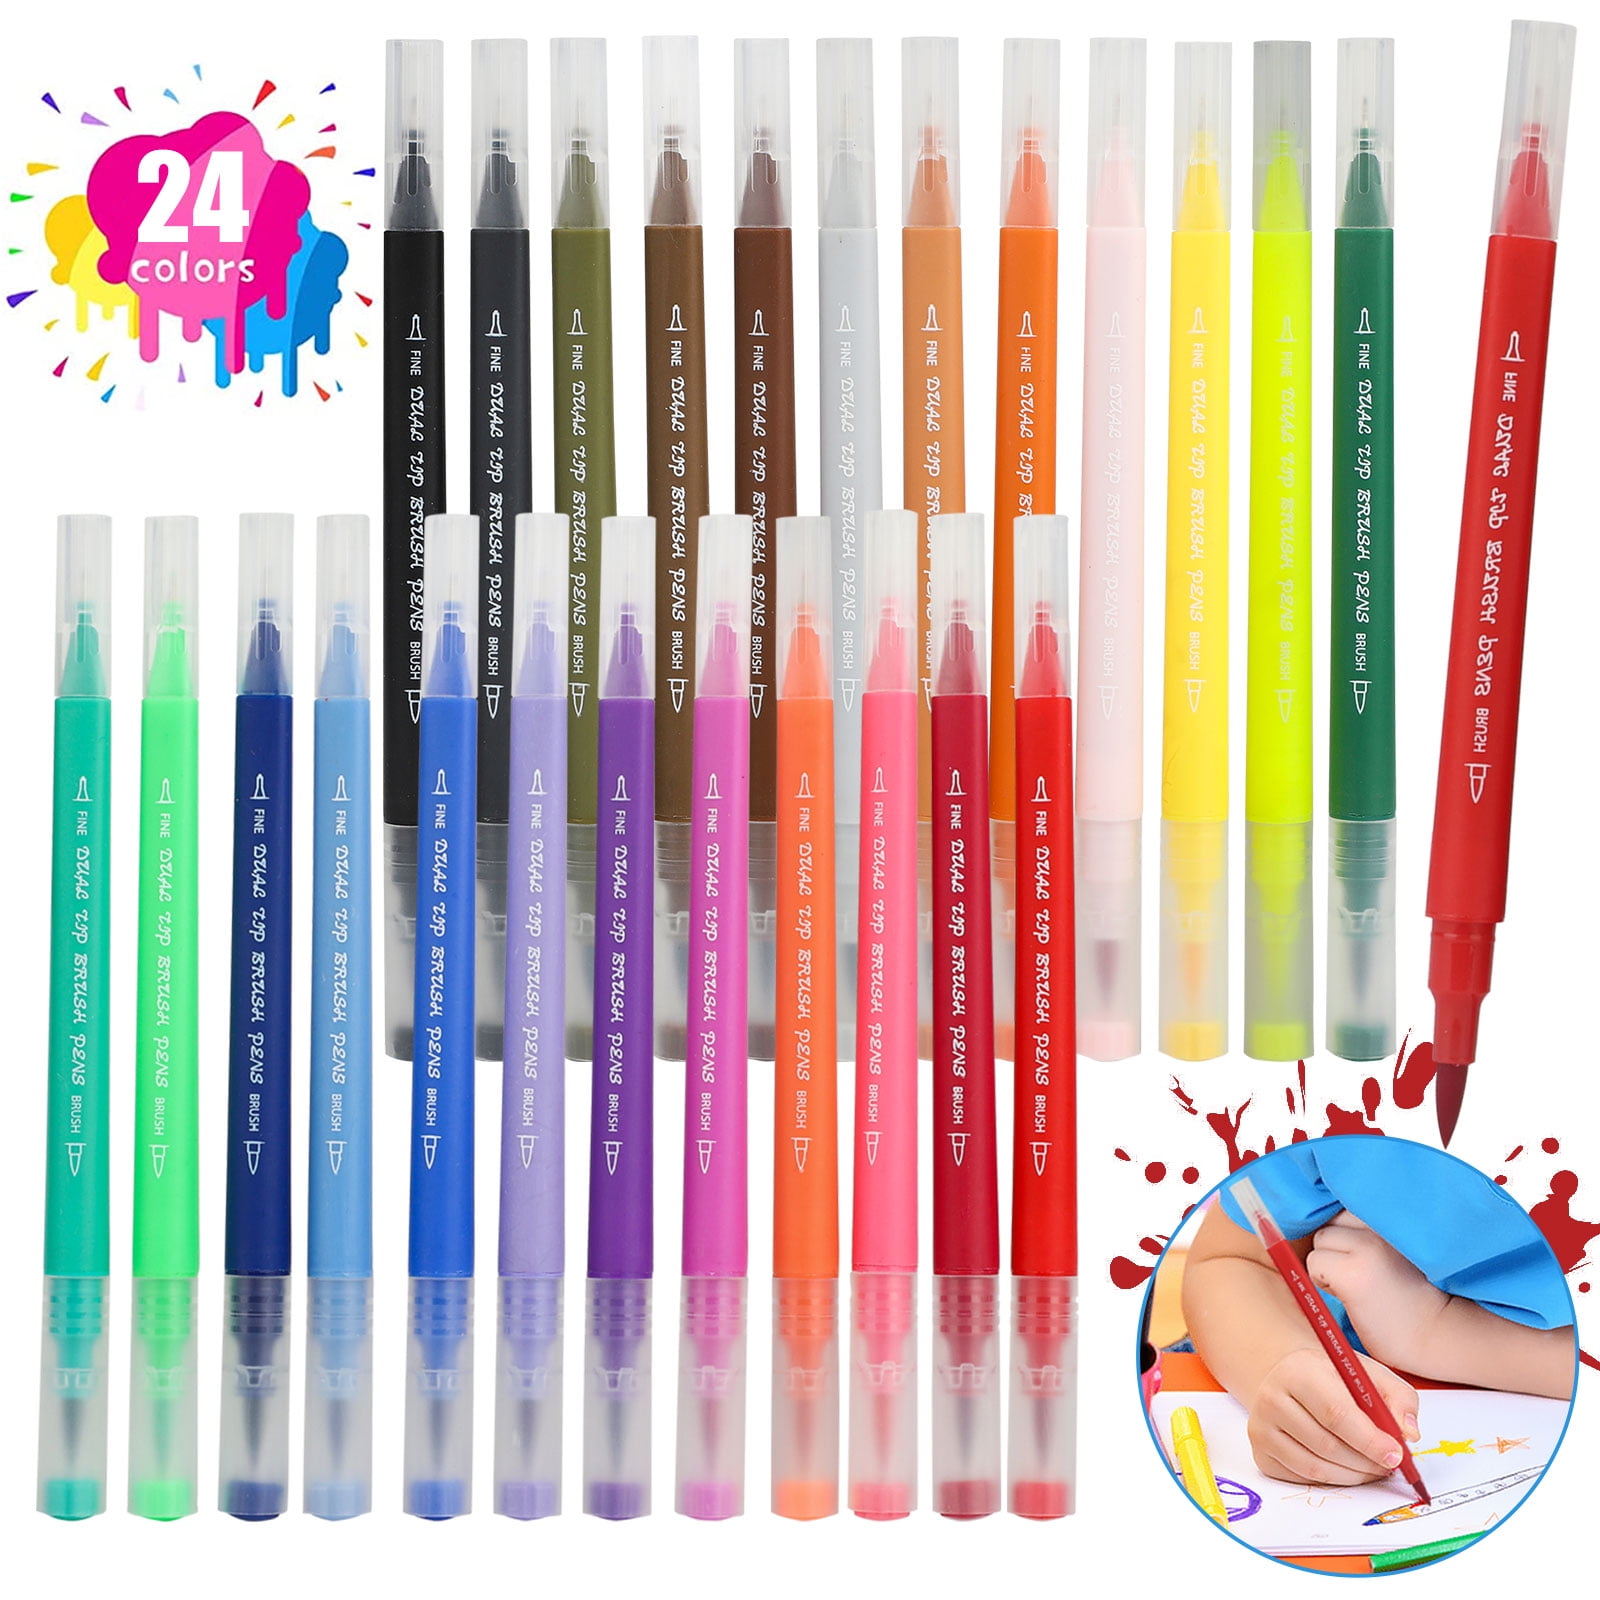 Tutuviw Dual Brush Marker Pens for Coloring,24 Colored Markers,Fine Point  and Brush Tip Art Markers for Kids Adult Coloring Books Bullet Journals  Planners,Note Taking Coloring Writing 